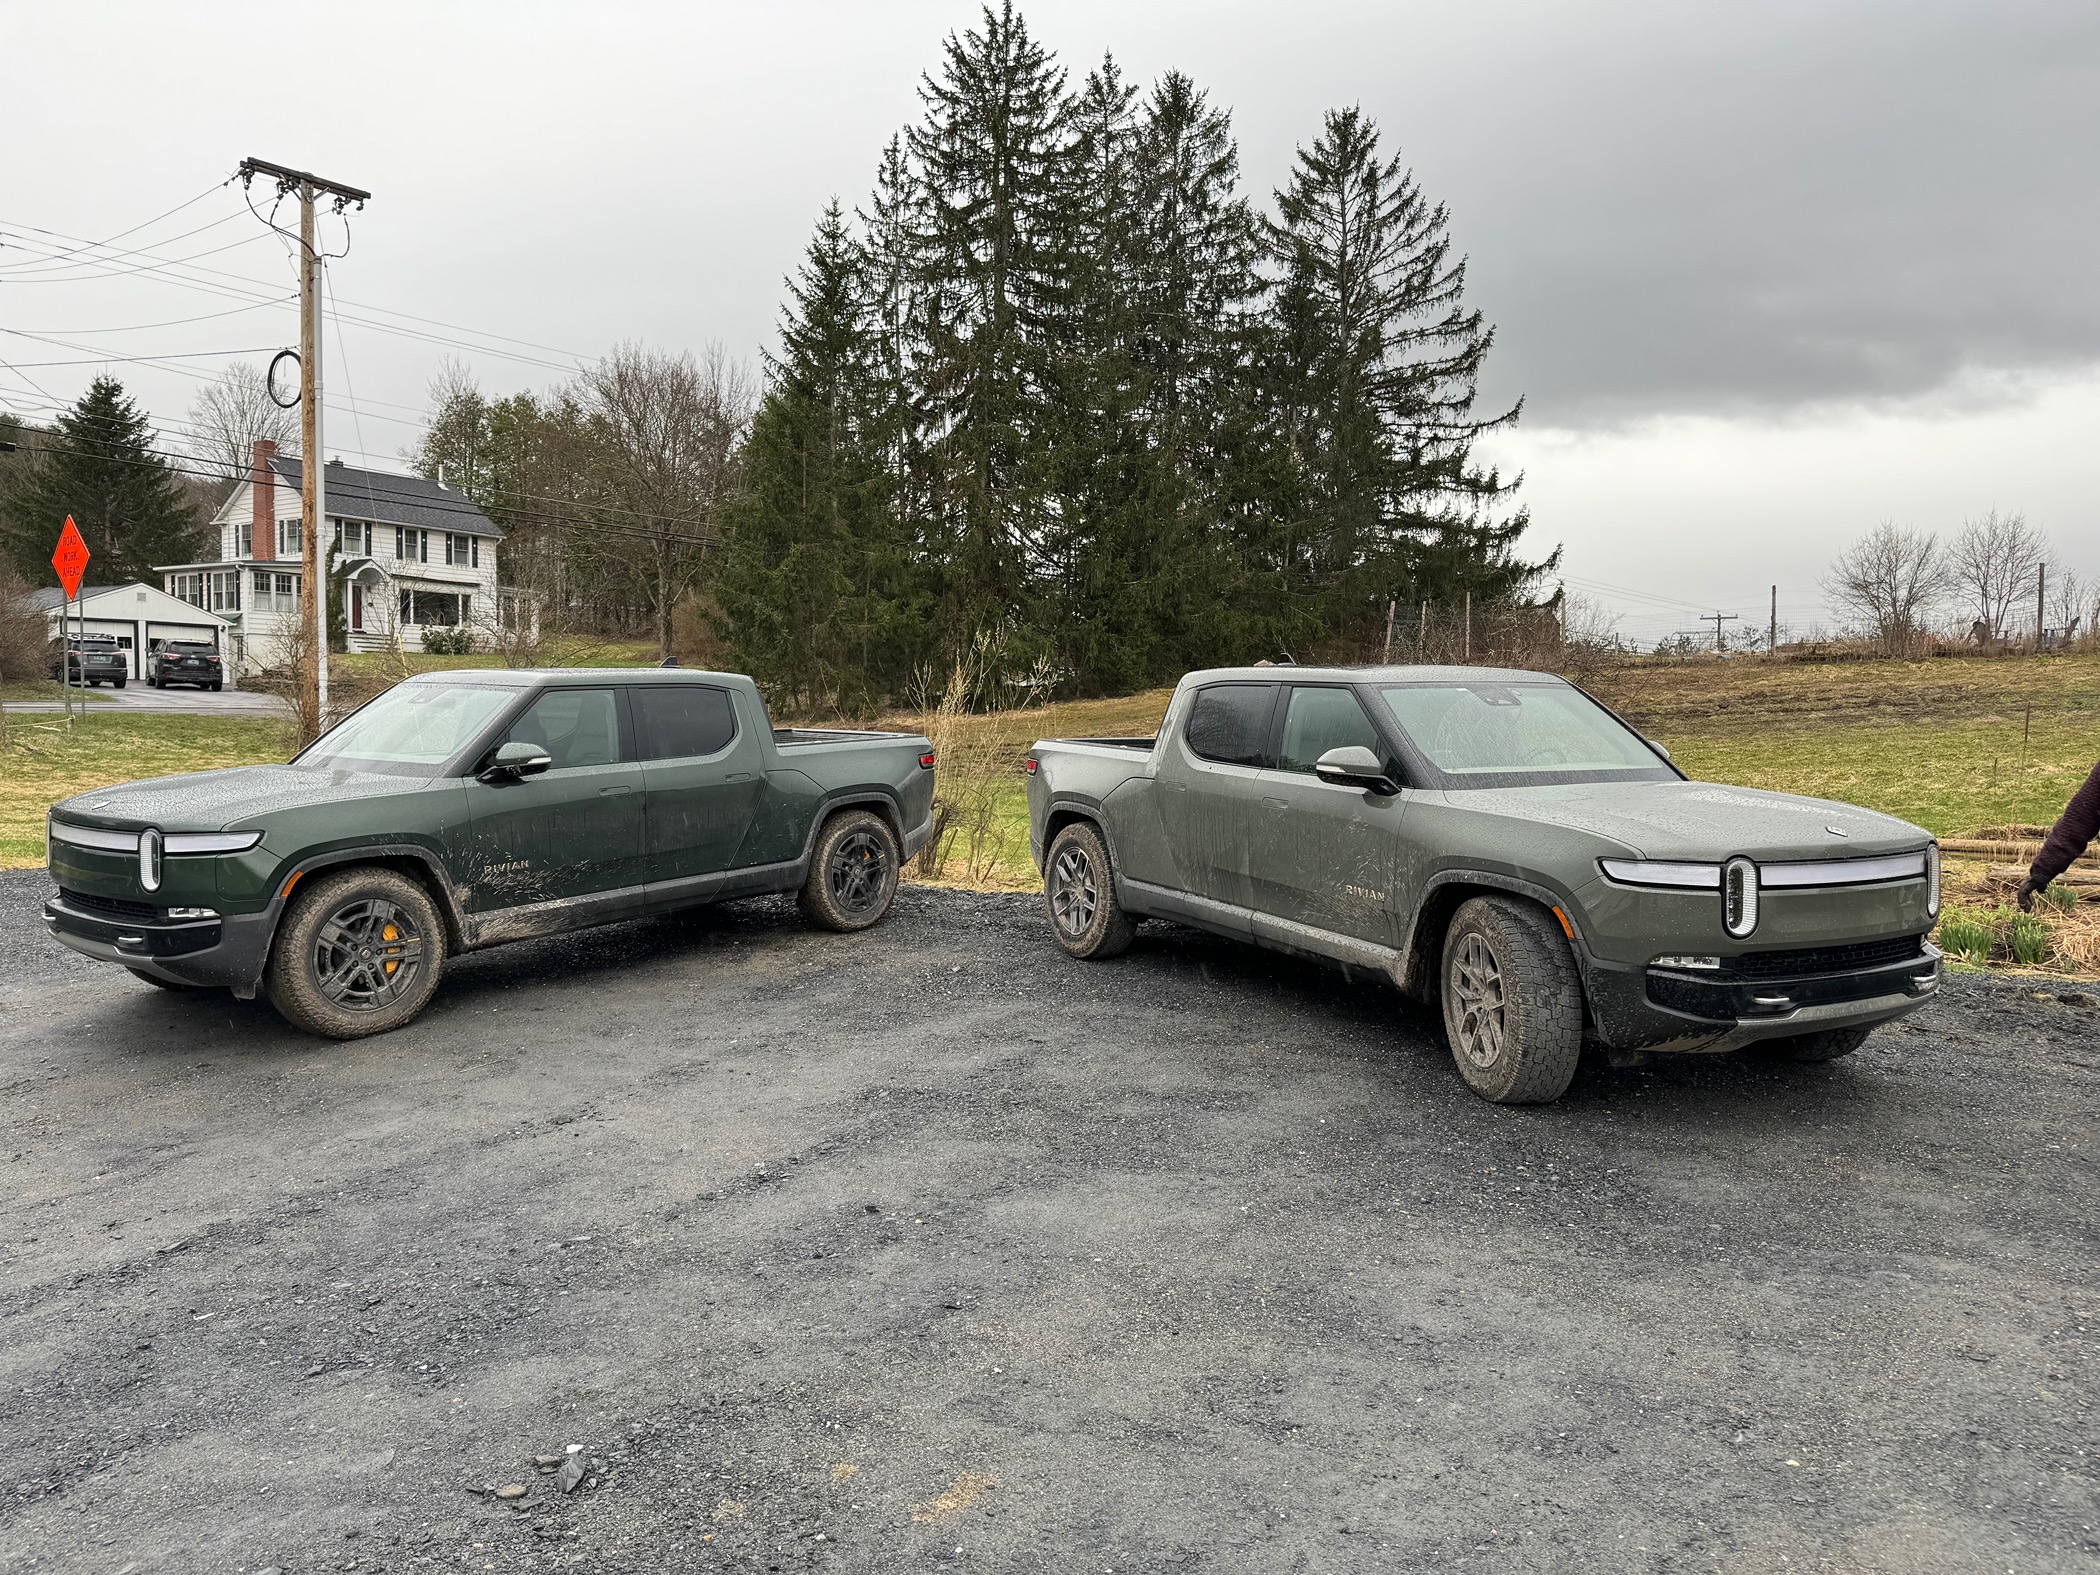 Rivian R1T R1S Random Rivian Photos of the Day - Post Yours! 📸 🤳 IMG_0851